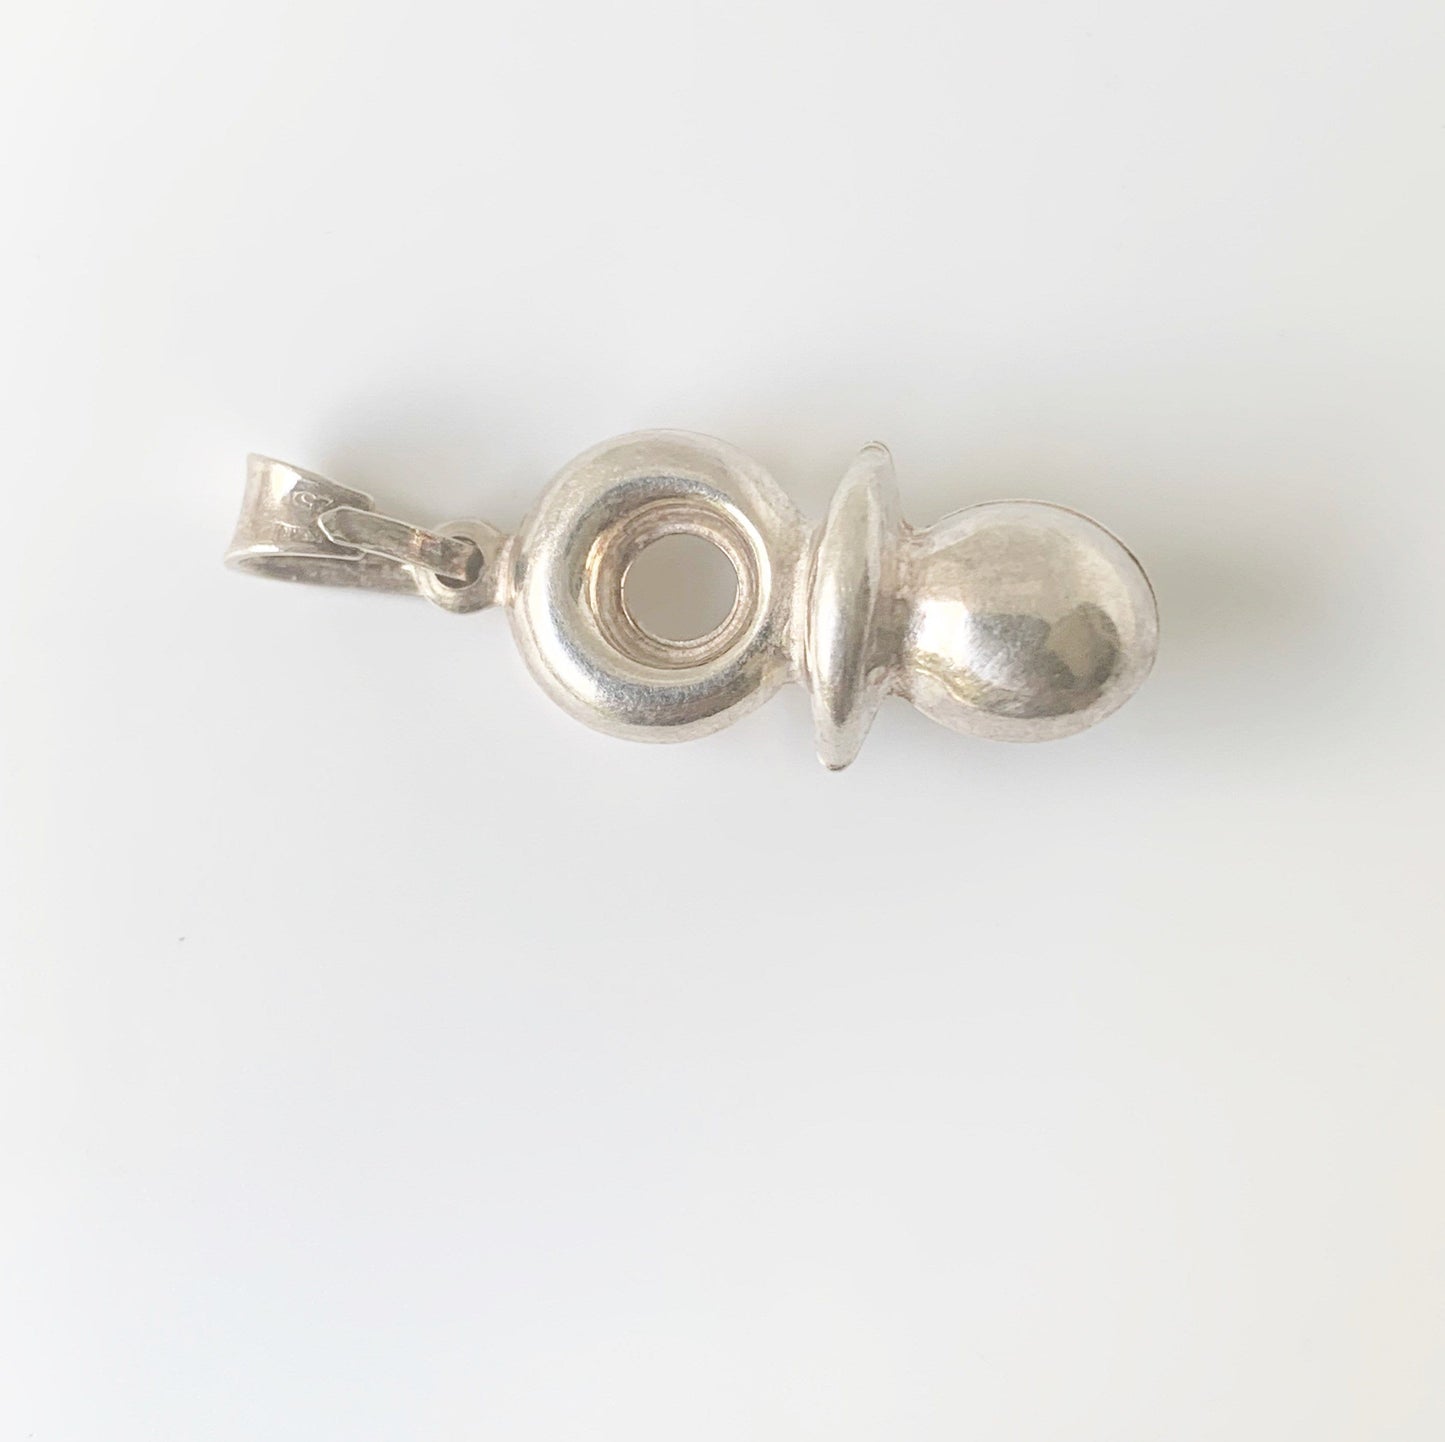 Vintage Puffy Baby Pacifier Charm | Silver Pacifier Charm | Silver Baby Binkie Charm